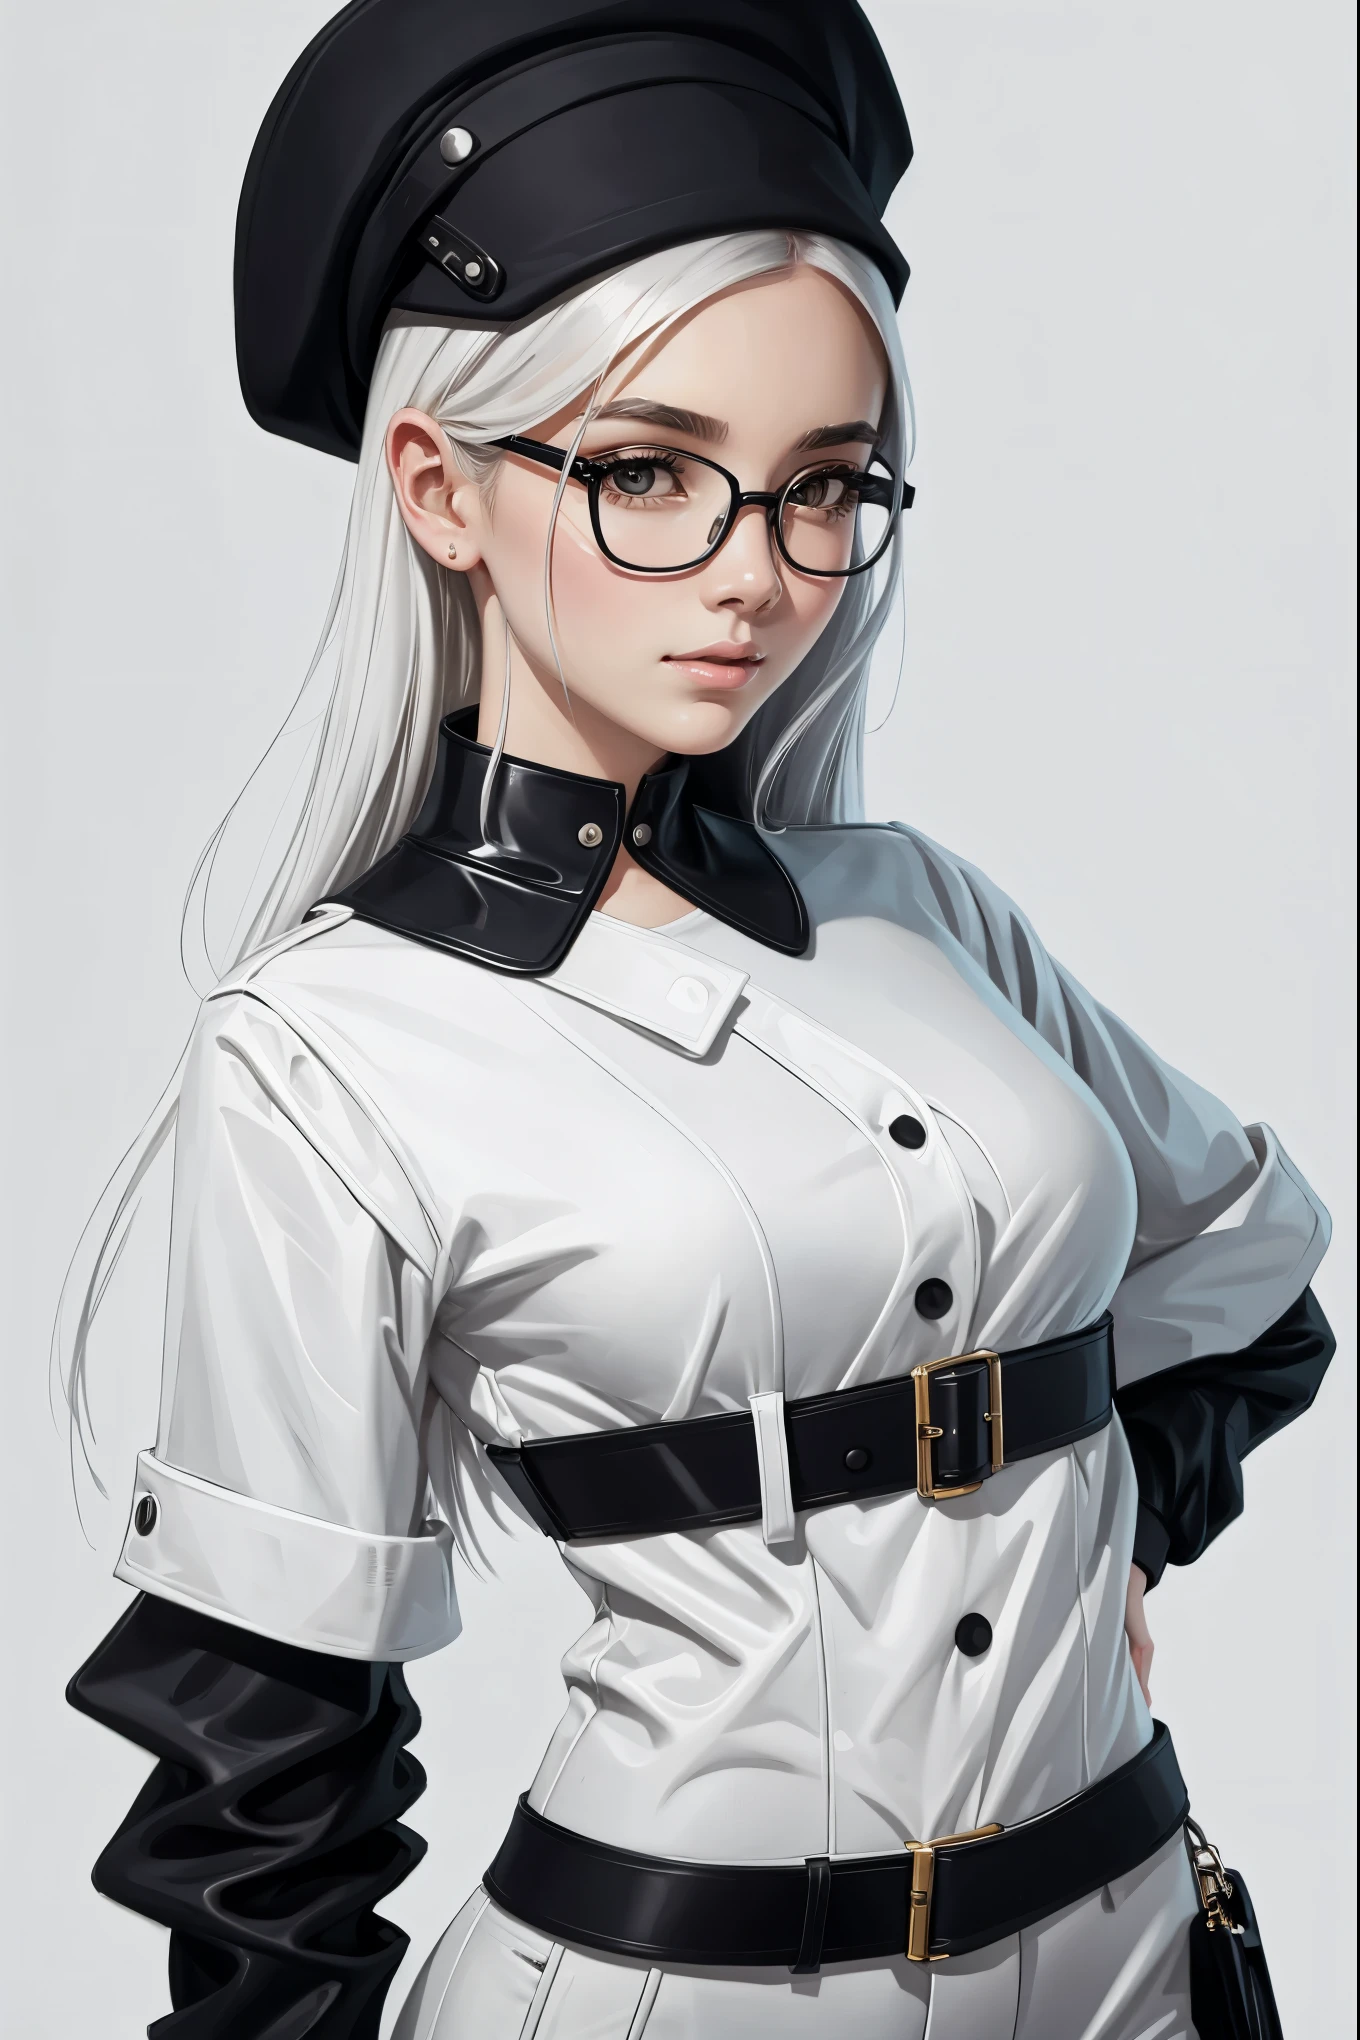 portraiture art of a modern woman, modern hipster clothing, black and white, thick outlines, character design, character concept art, loose paint, white background, painterly illustration, highly detailed, cartoonish proportions, glossy straight hair, creative